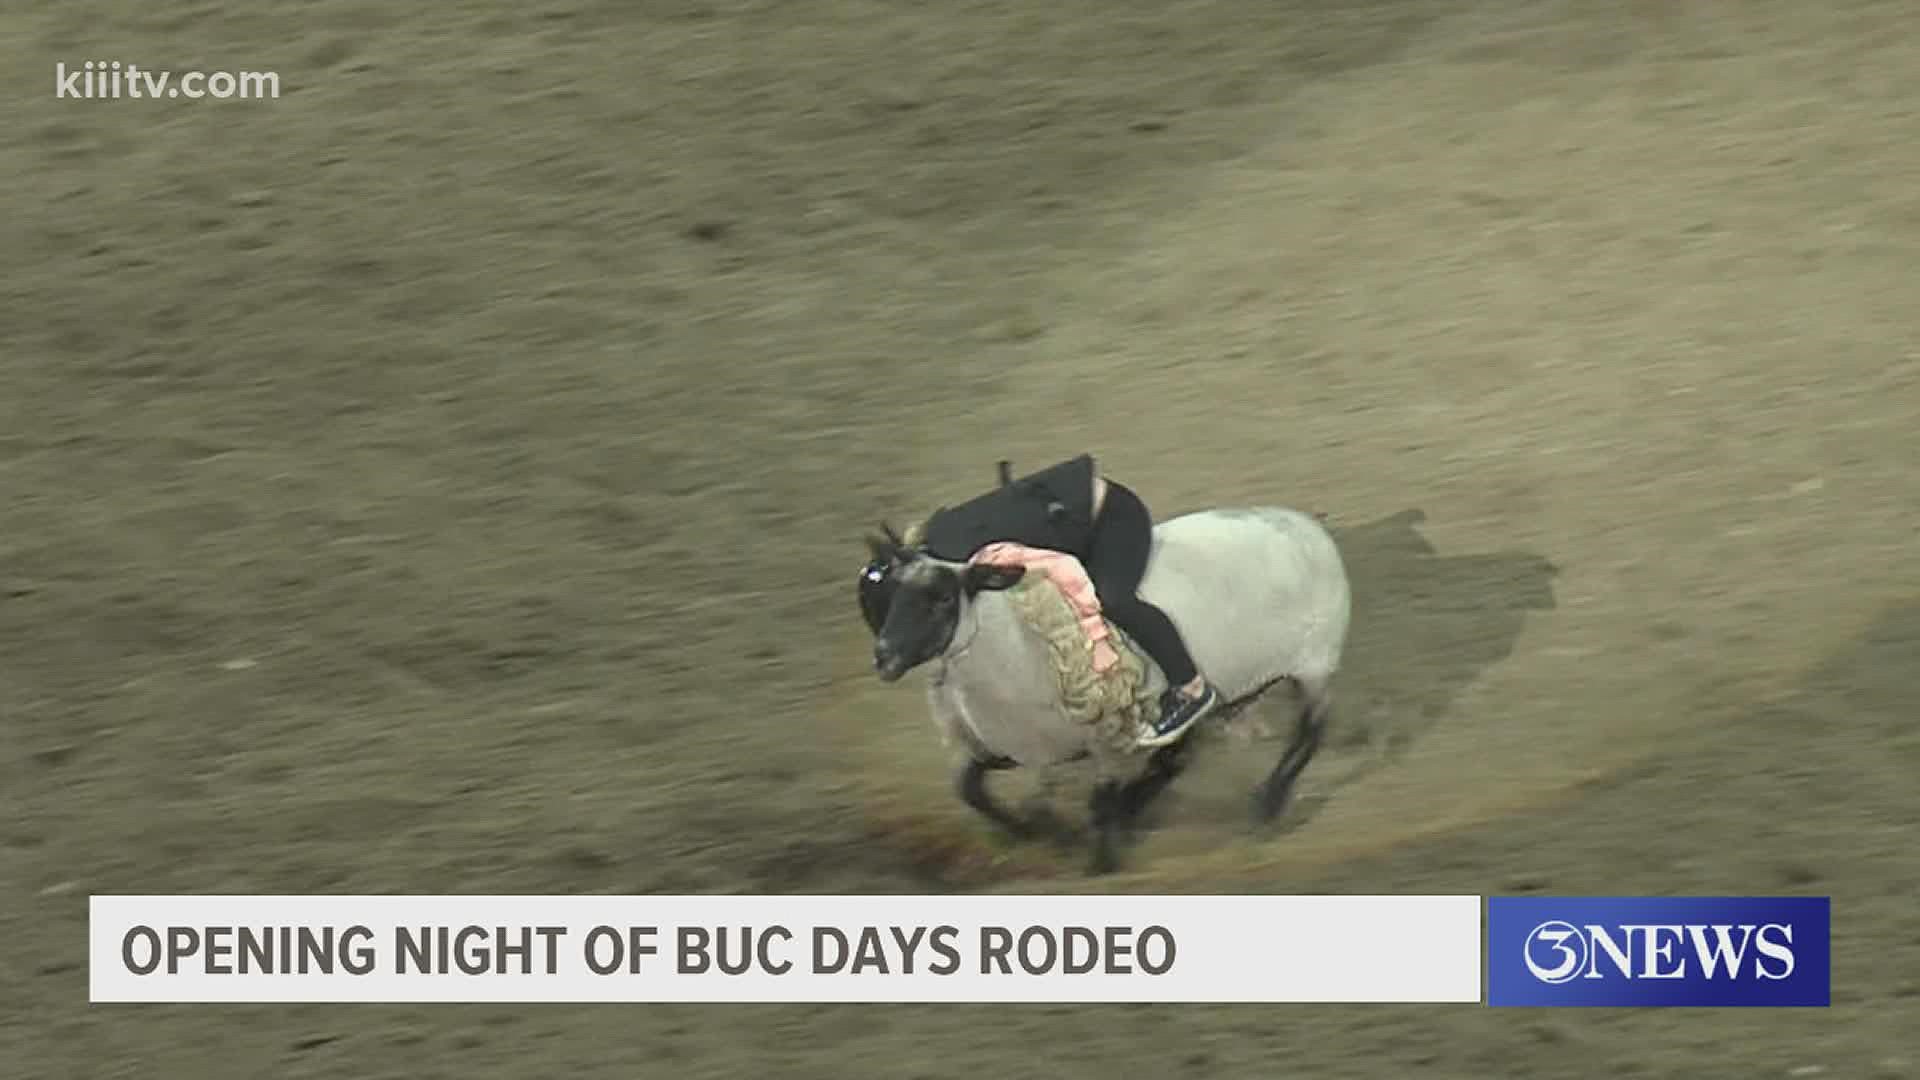 3News checked out some of the saddle bronc competition, the women's breakaway roping and the kiddos doing the mutton bustin'.